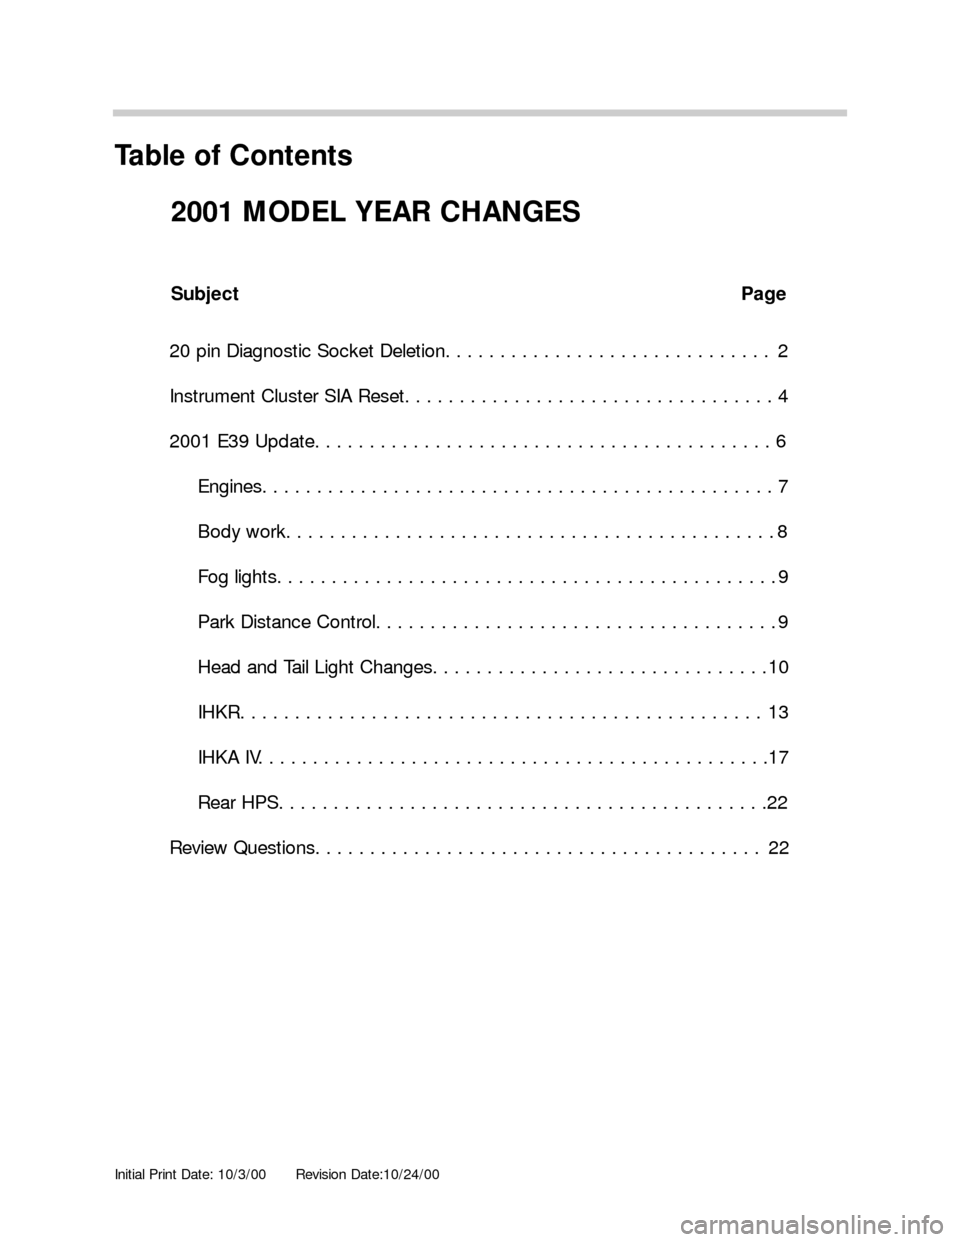 BMW 3 SERIES 2004 E46 Model Yar Changes Initial Print Date: 10/3/00Revision Date:10/24/00
Subject Page
20 pin Diagnostic Socket Deletion. . . . . . . . . . . . . . . . . . . . . . . . . . . . . . 2
Instrument Cluster SIA Reset. . . . . . . 